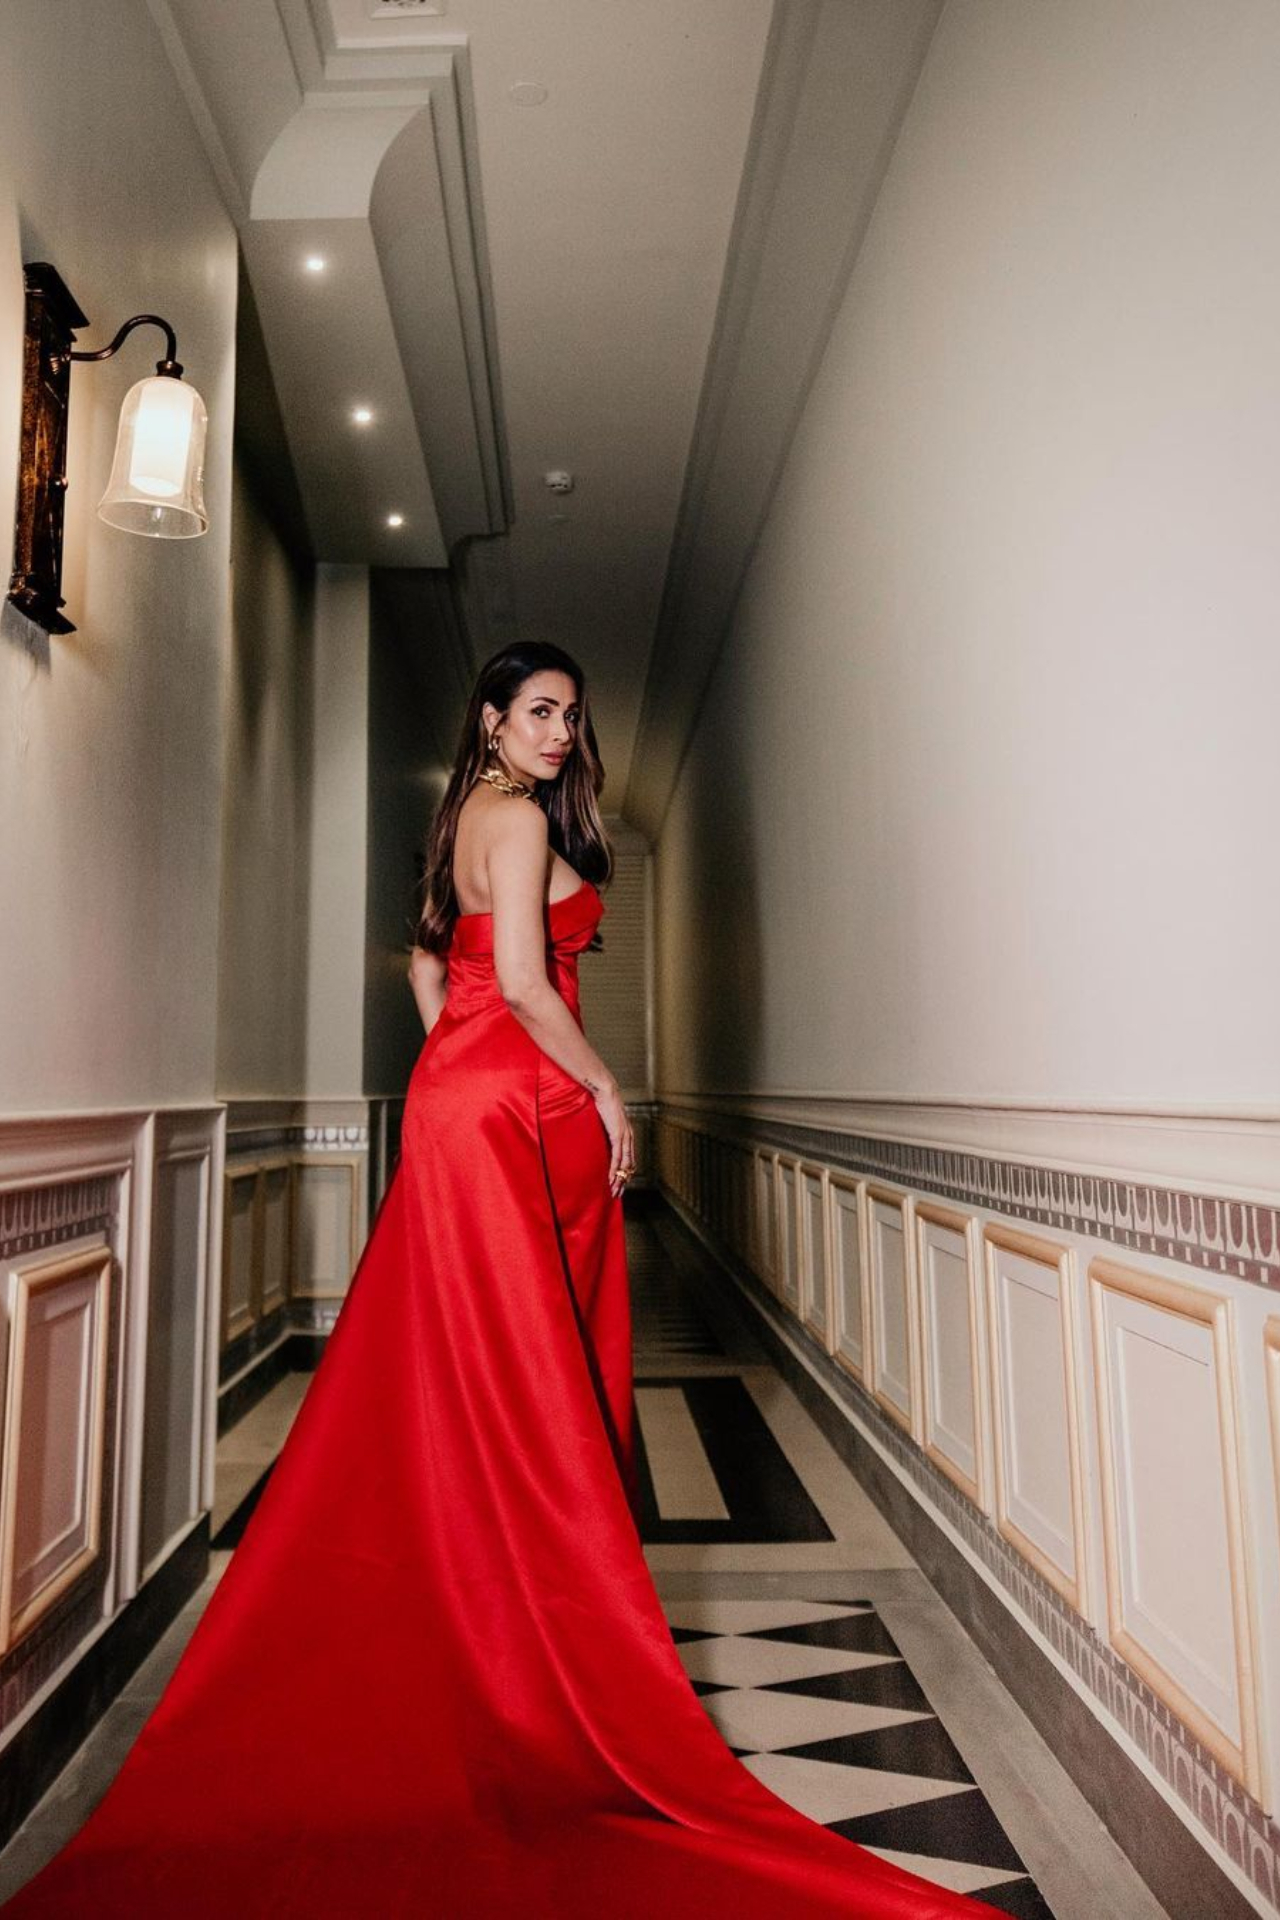 Malaika Arora looked like a dream in a red strapless gown.